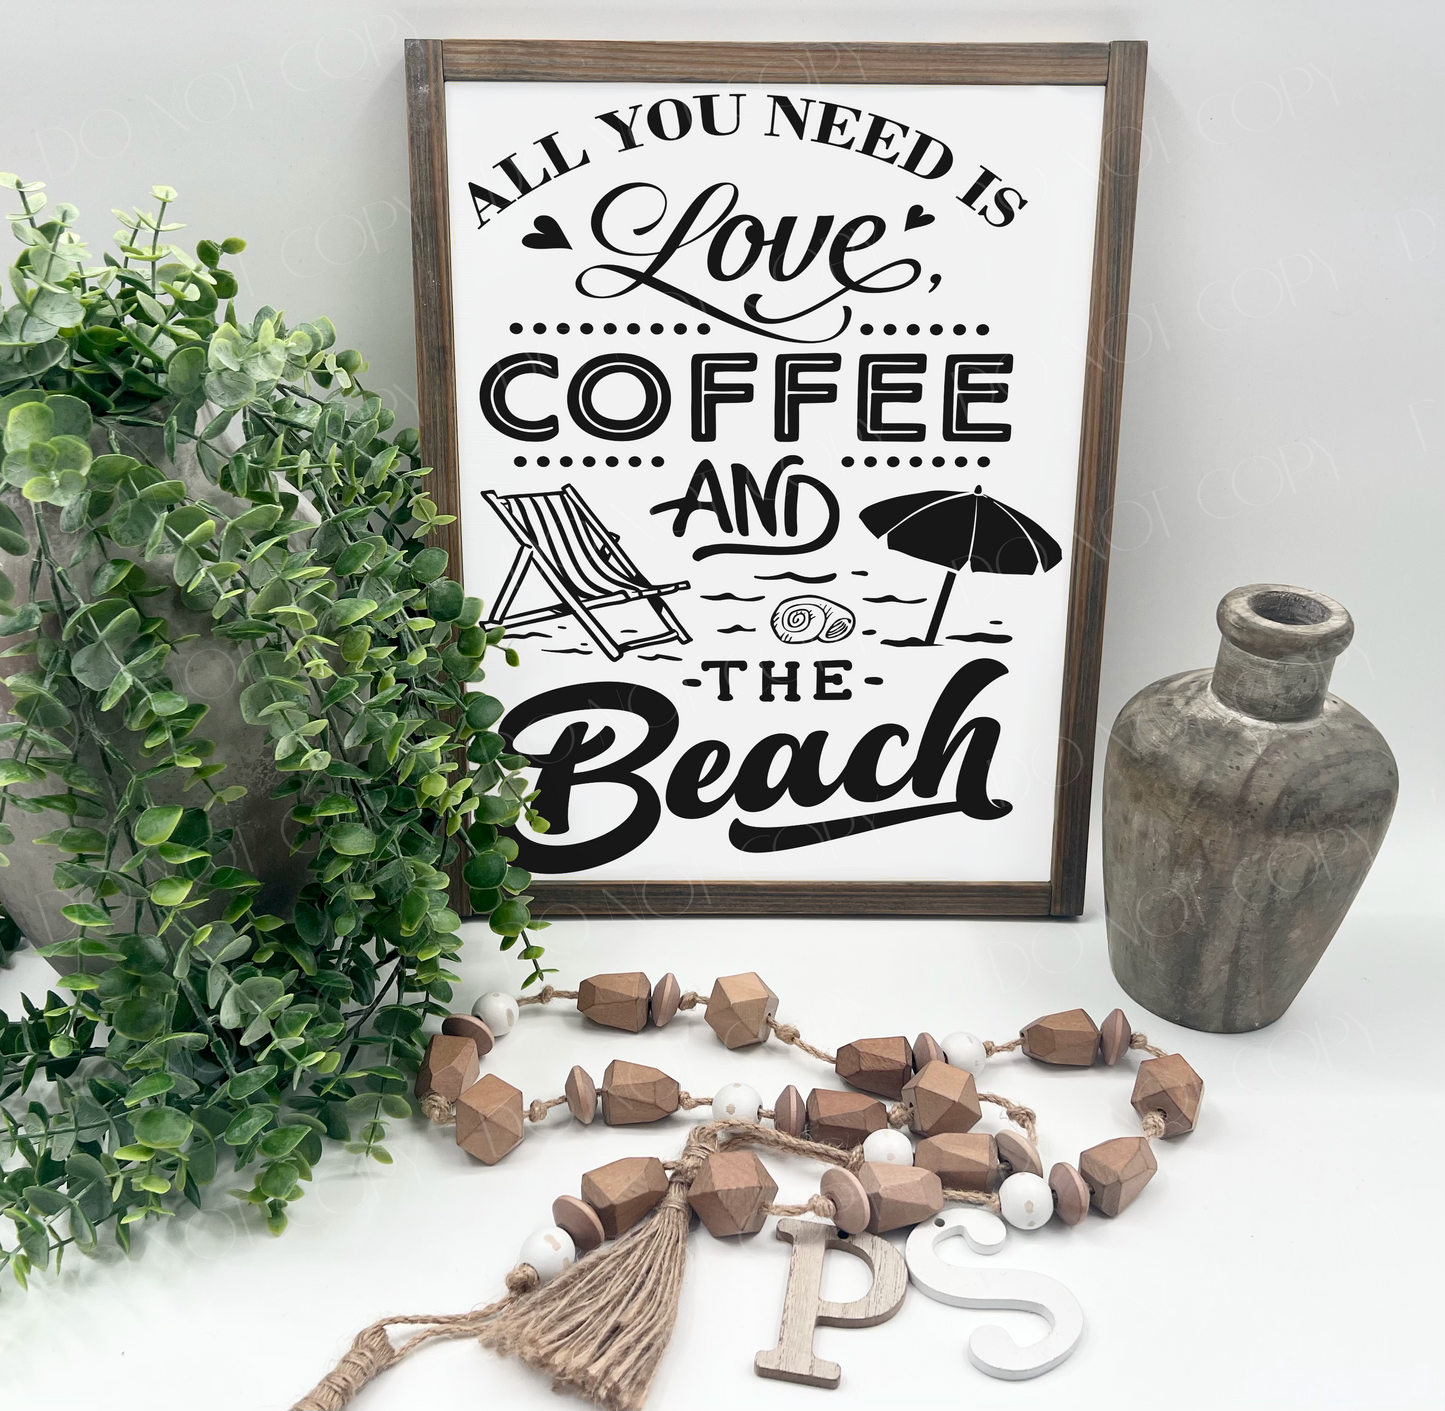 All You Need Is Love Coffee And The Beach - White/Thick/W. Gray - Wood Sign